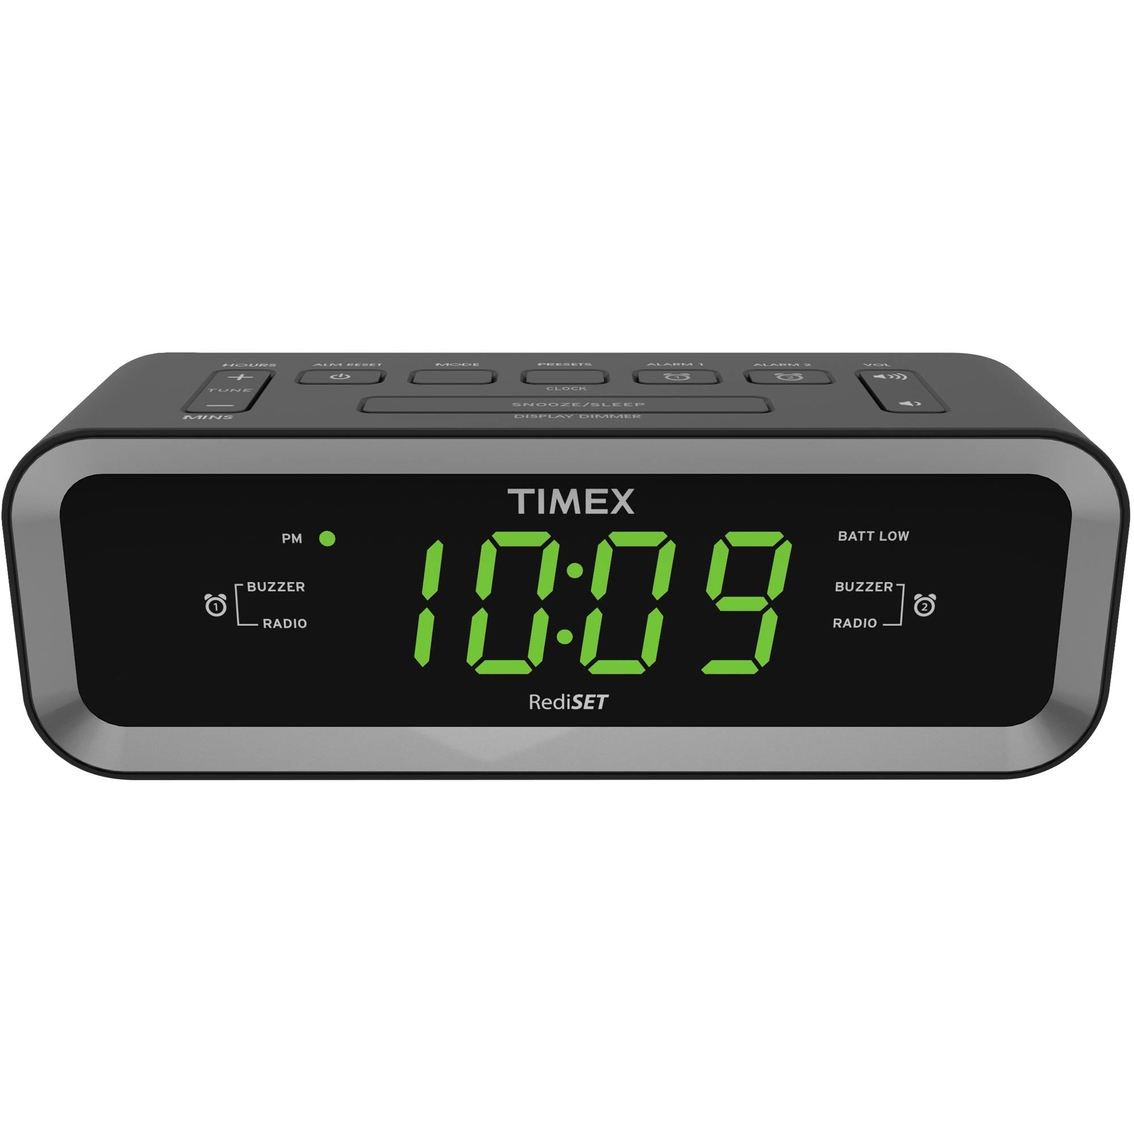 Timex Am Fm Dual Alarm Clock Radio With Usb Charge Port | Mobile Device